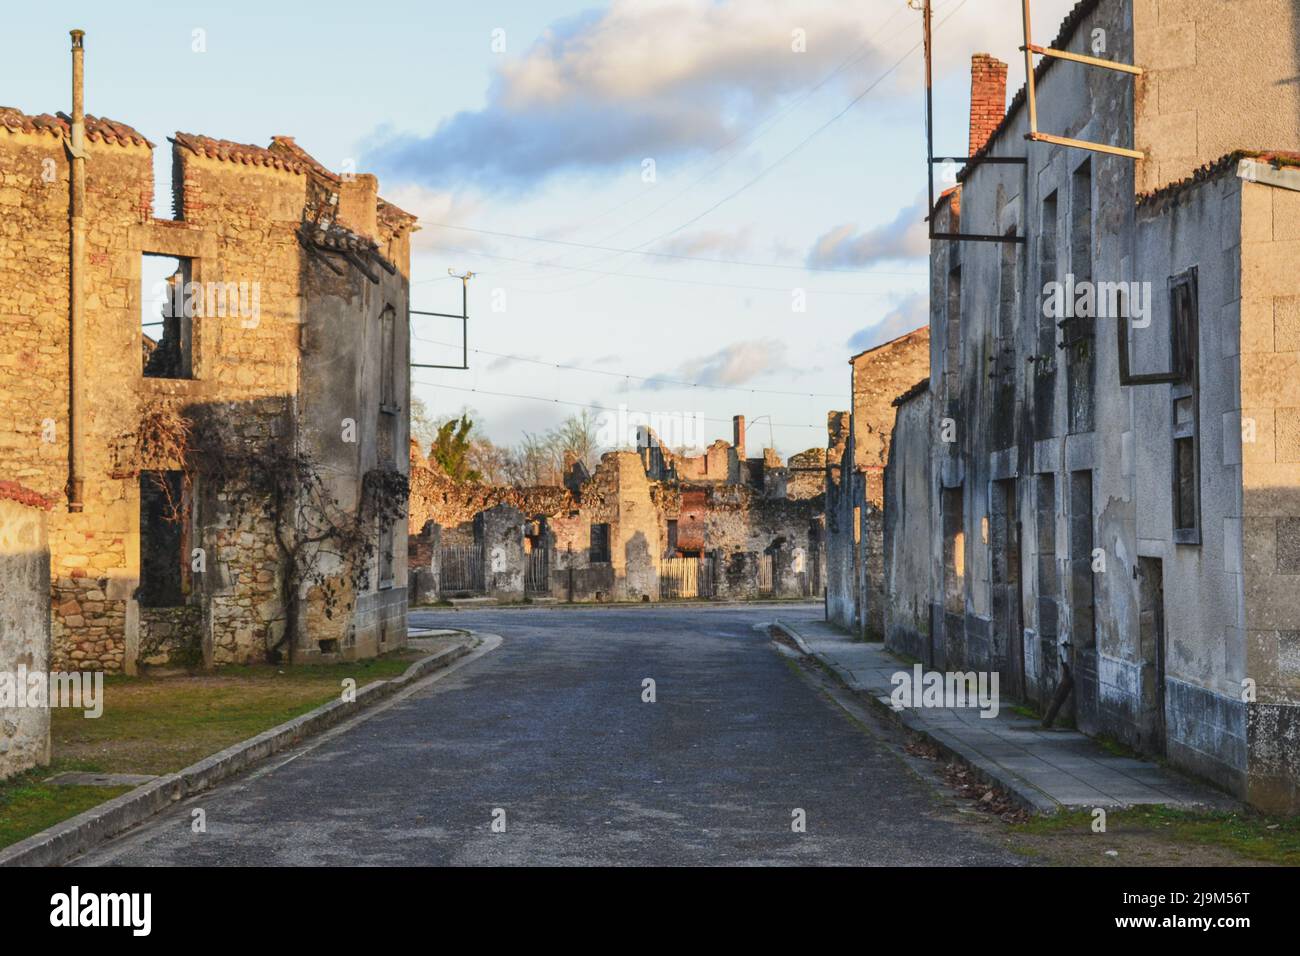 Destroyed buildings during World War 2 in Oradour- sur -Glane France Stock Photo